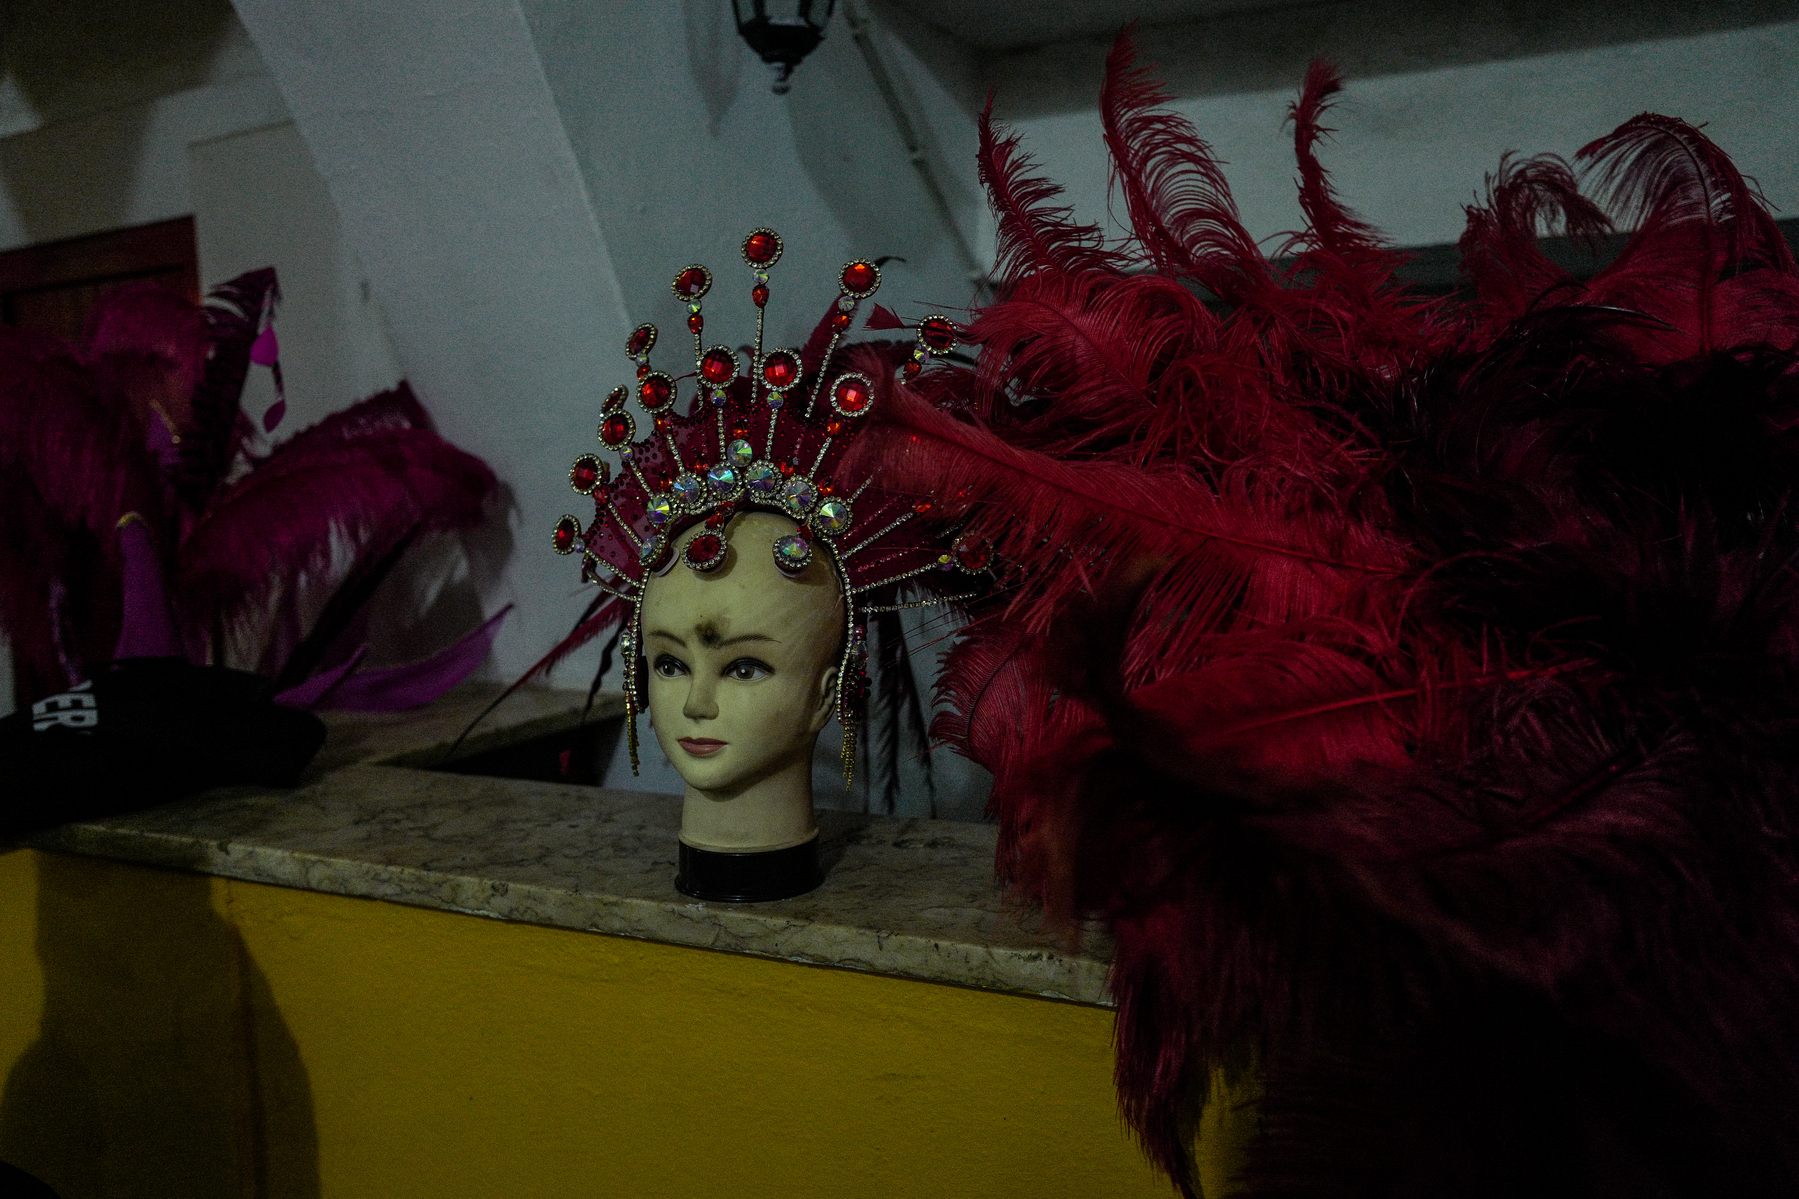 A mannequin head wearing a traditional Chinese headdress adorned with red feathers and gemstones, positioned on a shelf next to red feathered accessories.